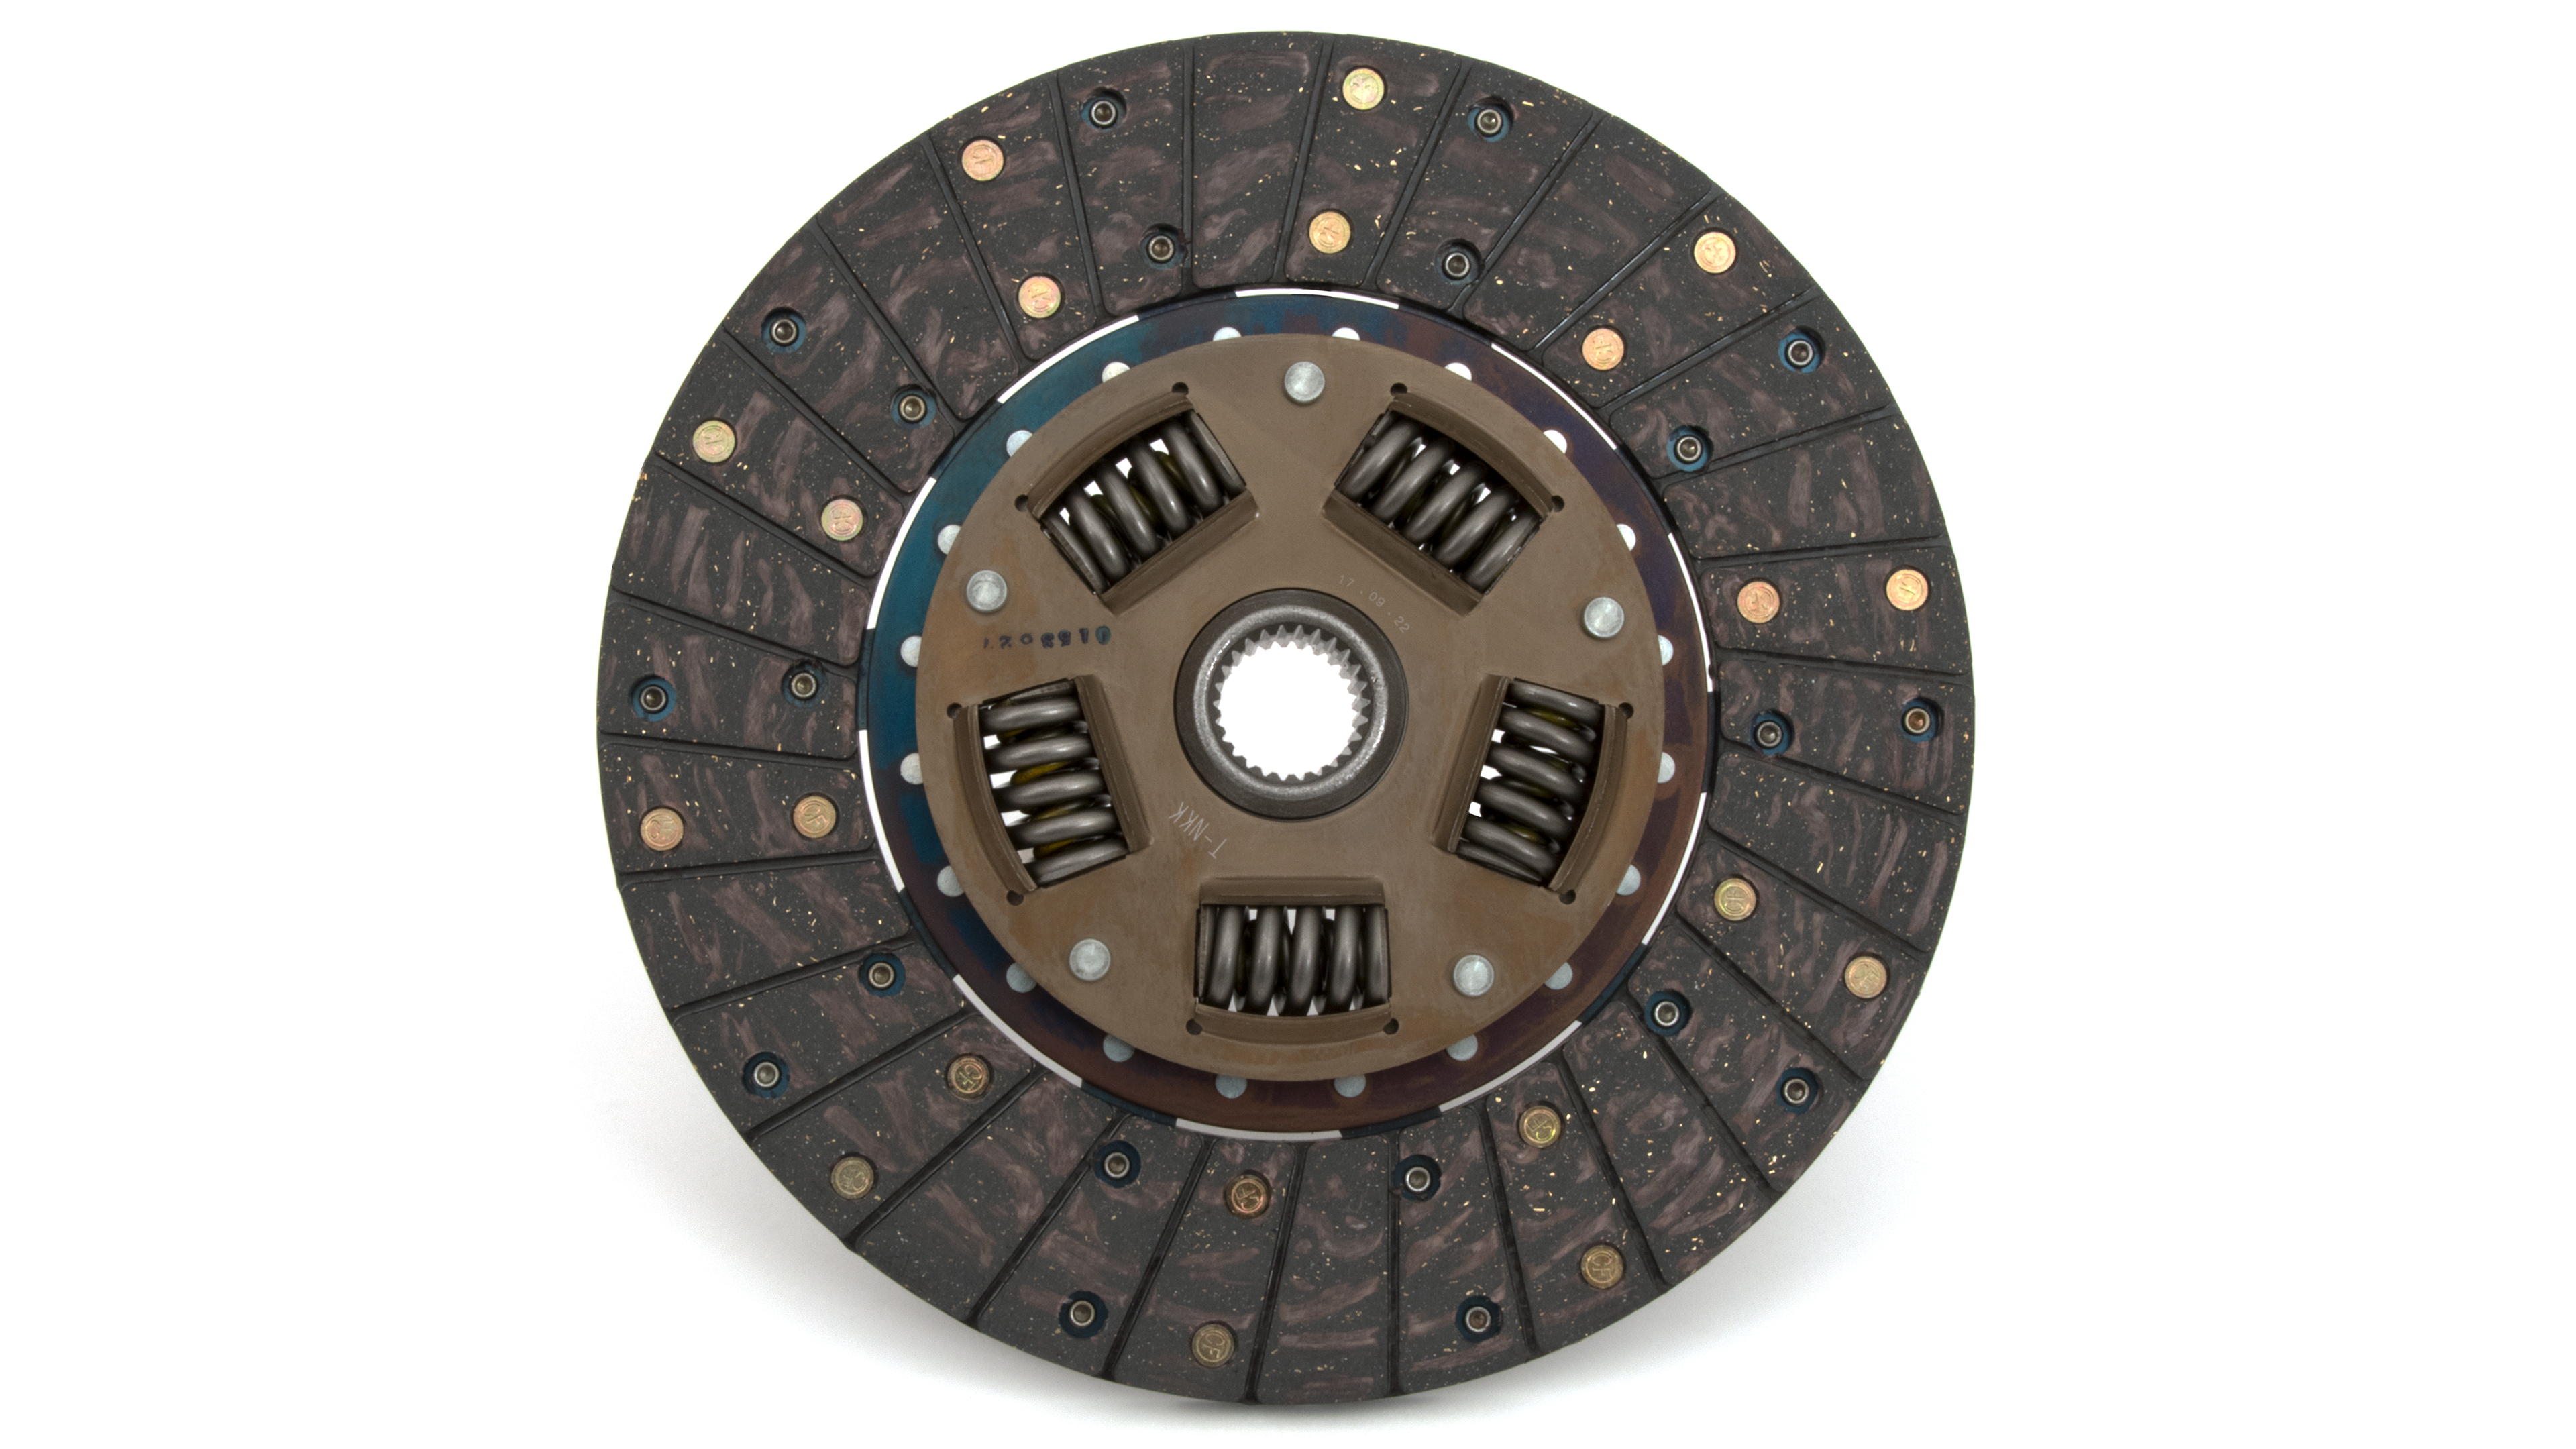 1957-1978 Chevrolet Corvette  Centerforce  I and II, Clutch Friction Disc